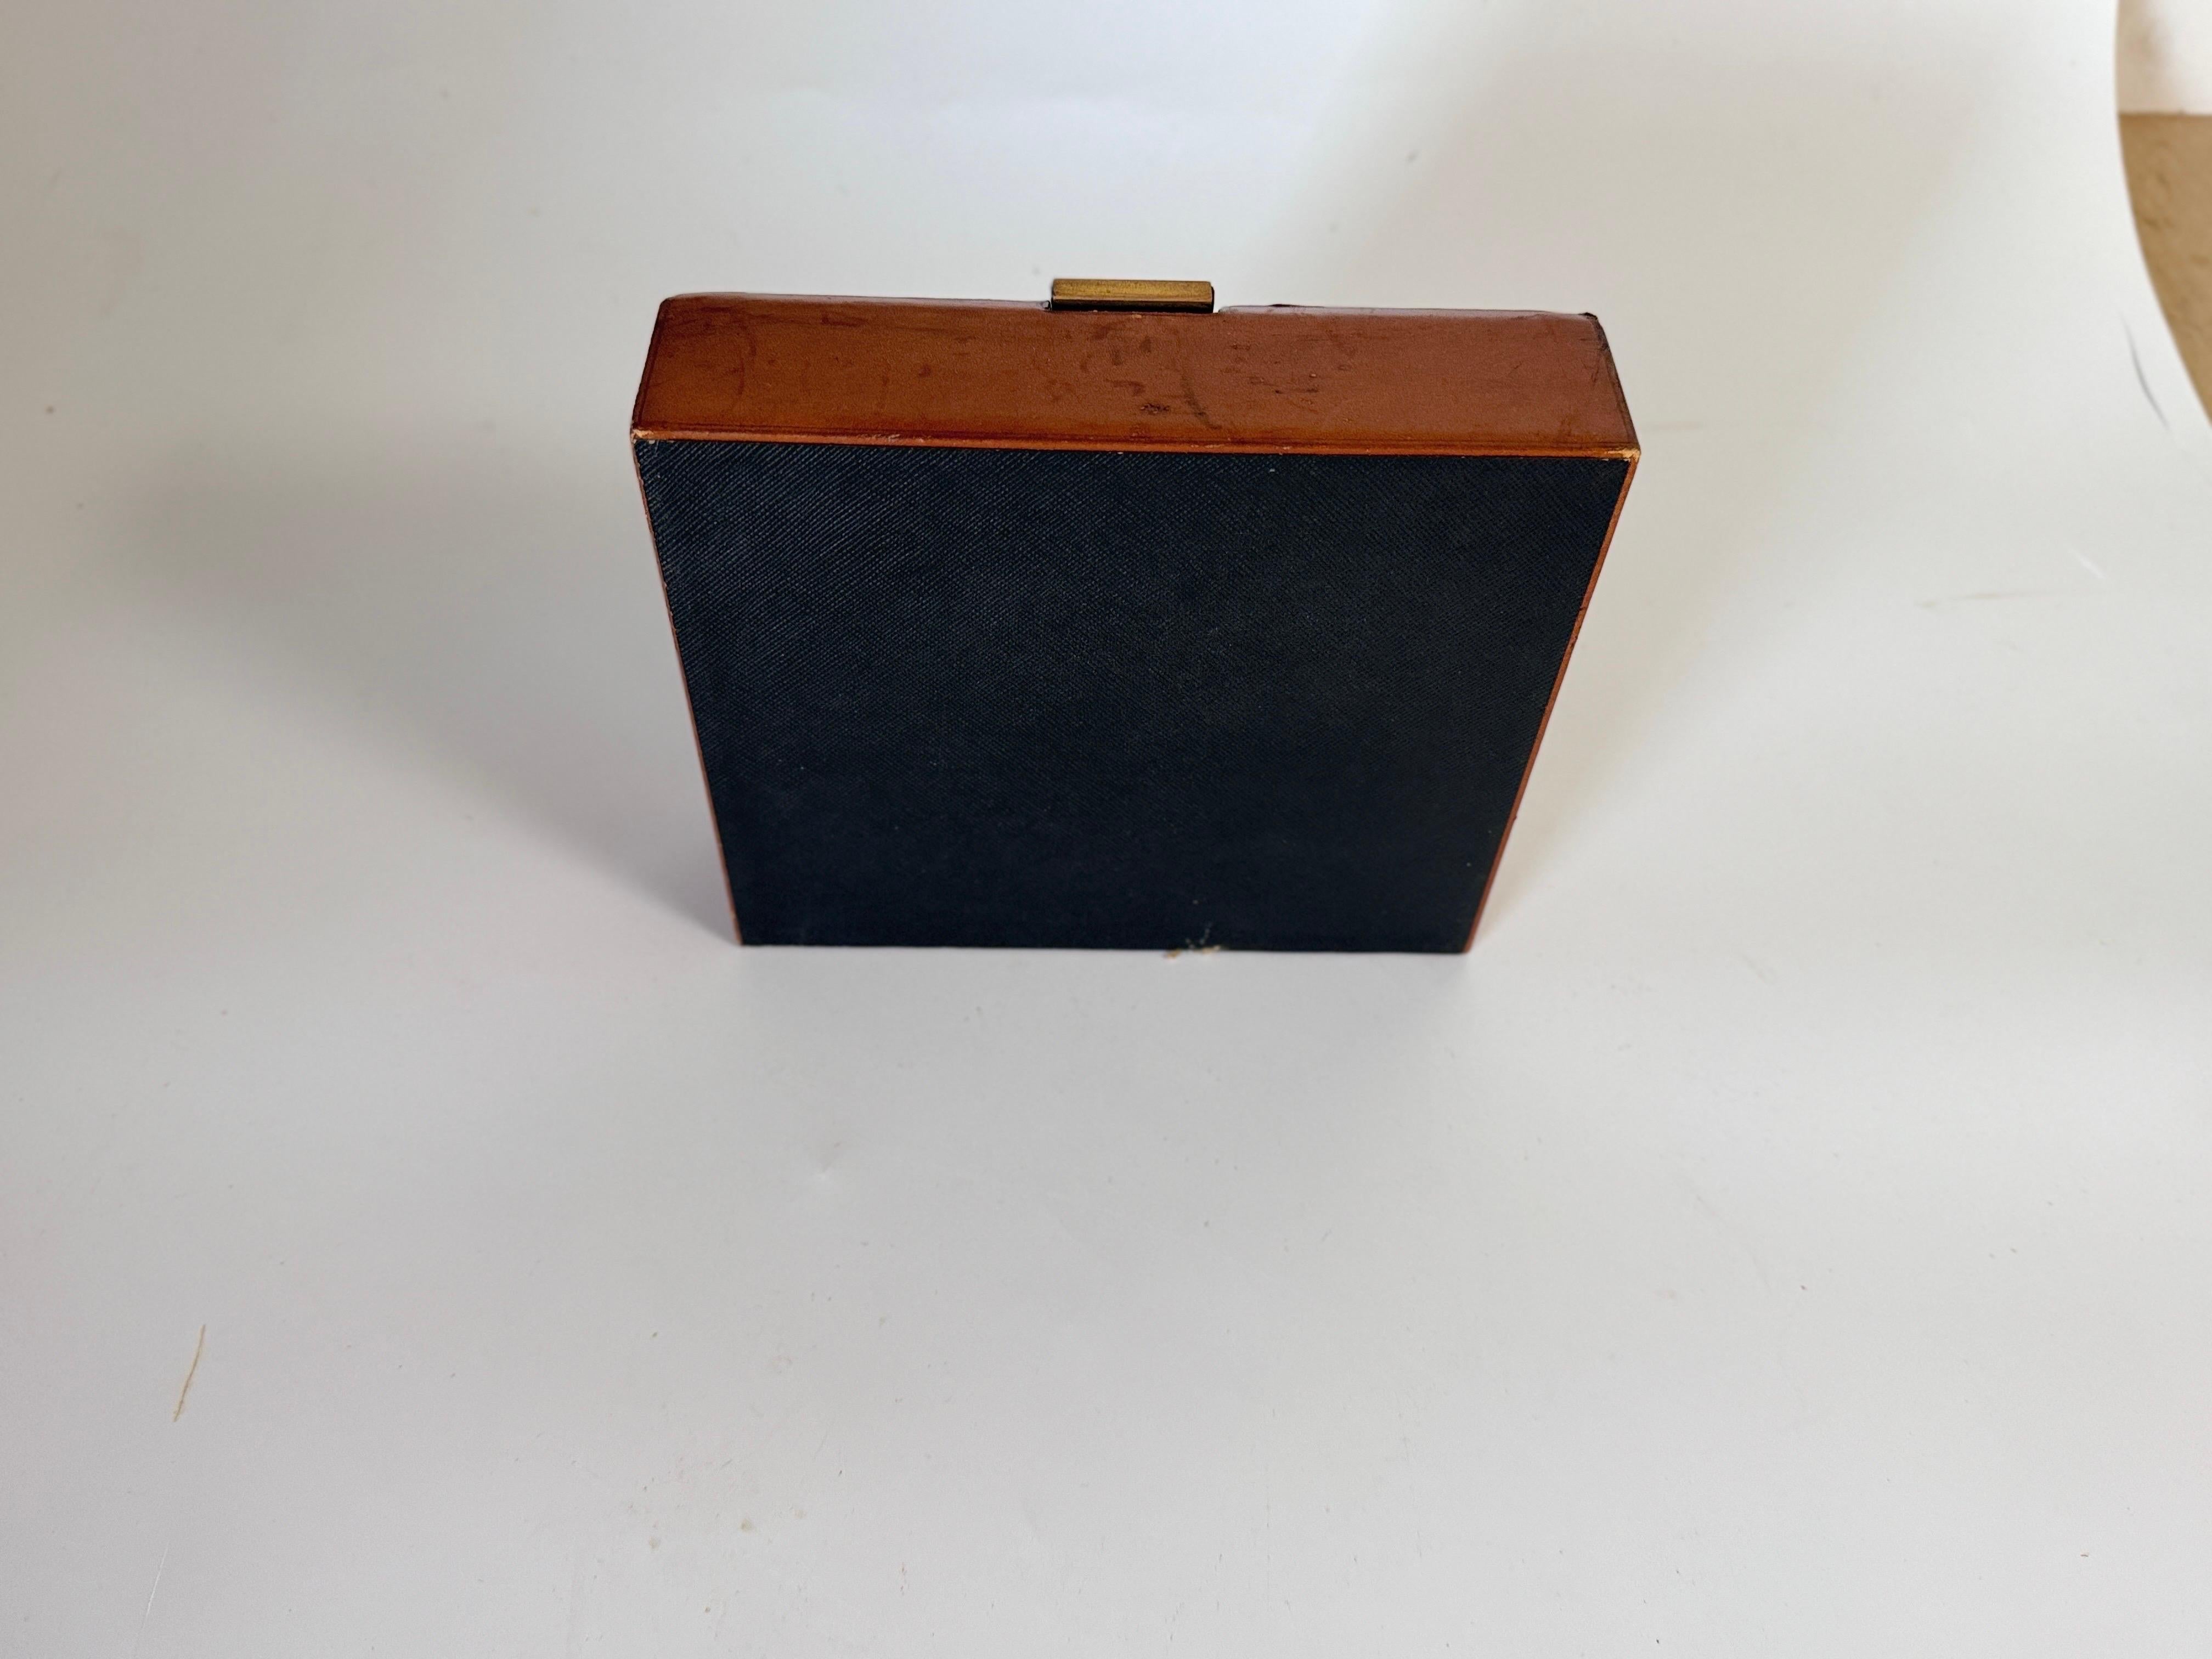 Leather Covered Tobacco Box Wood Brown Jacques Adnet Style France 1940 by Lancel For Sale 2